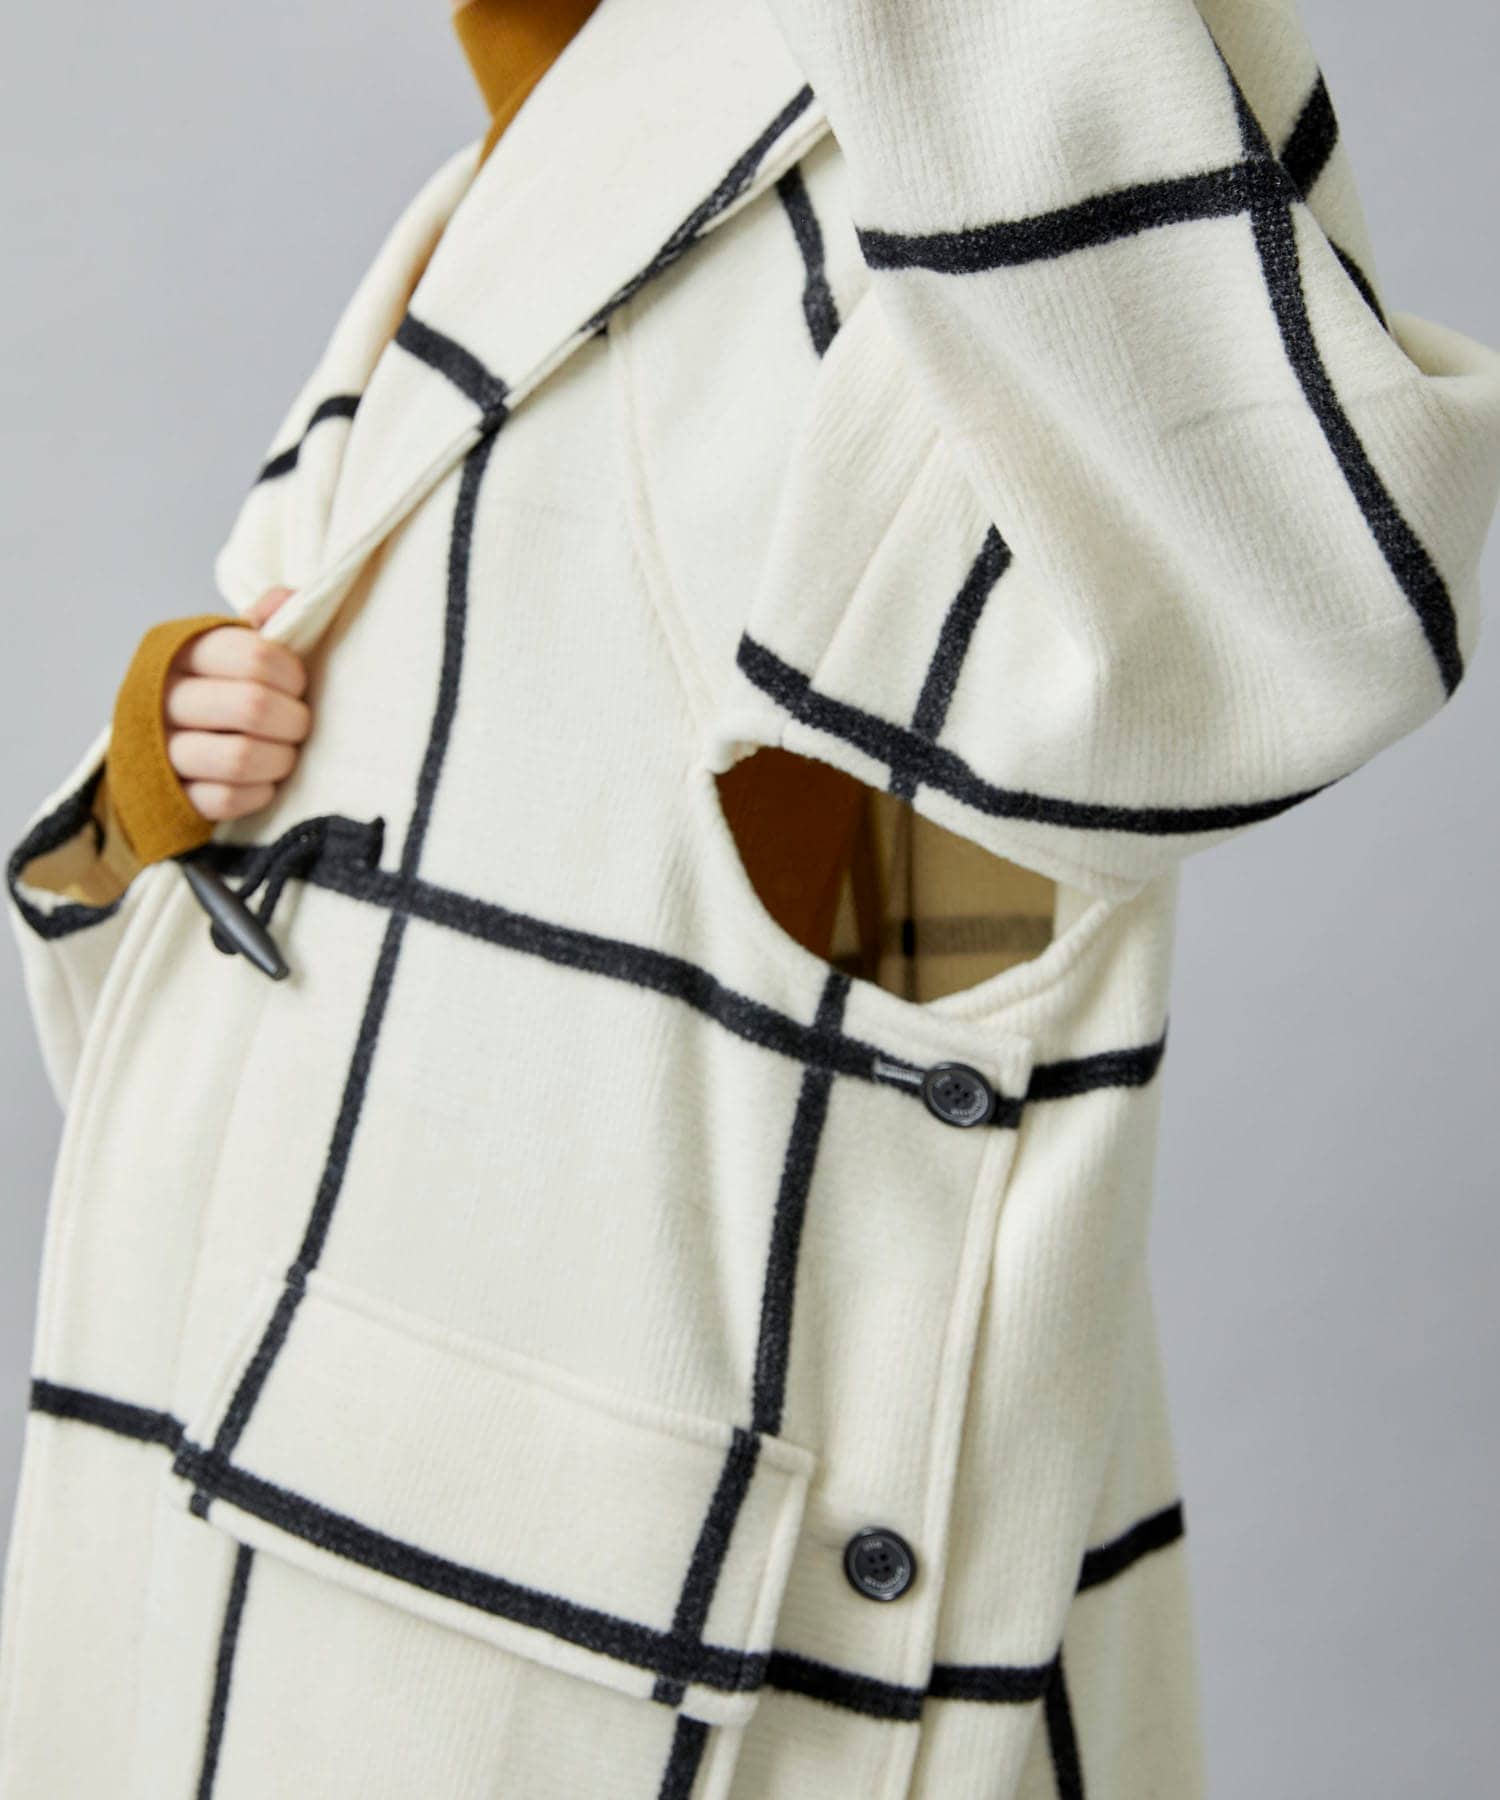 GRID-PATTERN DUFFLE COAT rito structure